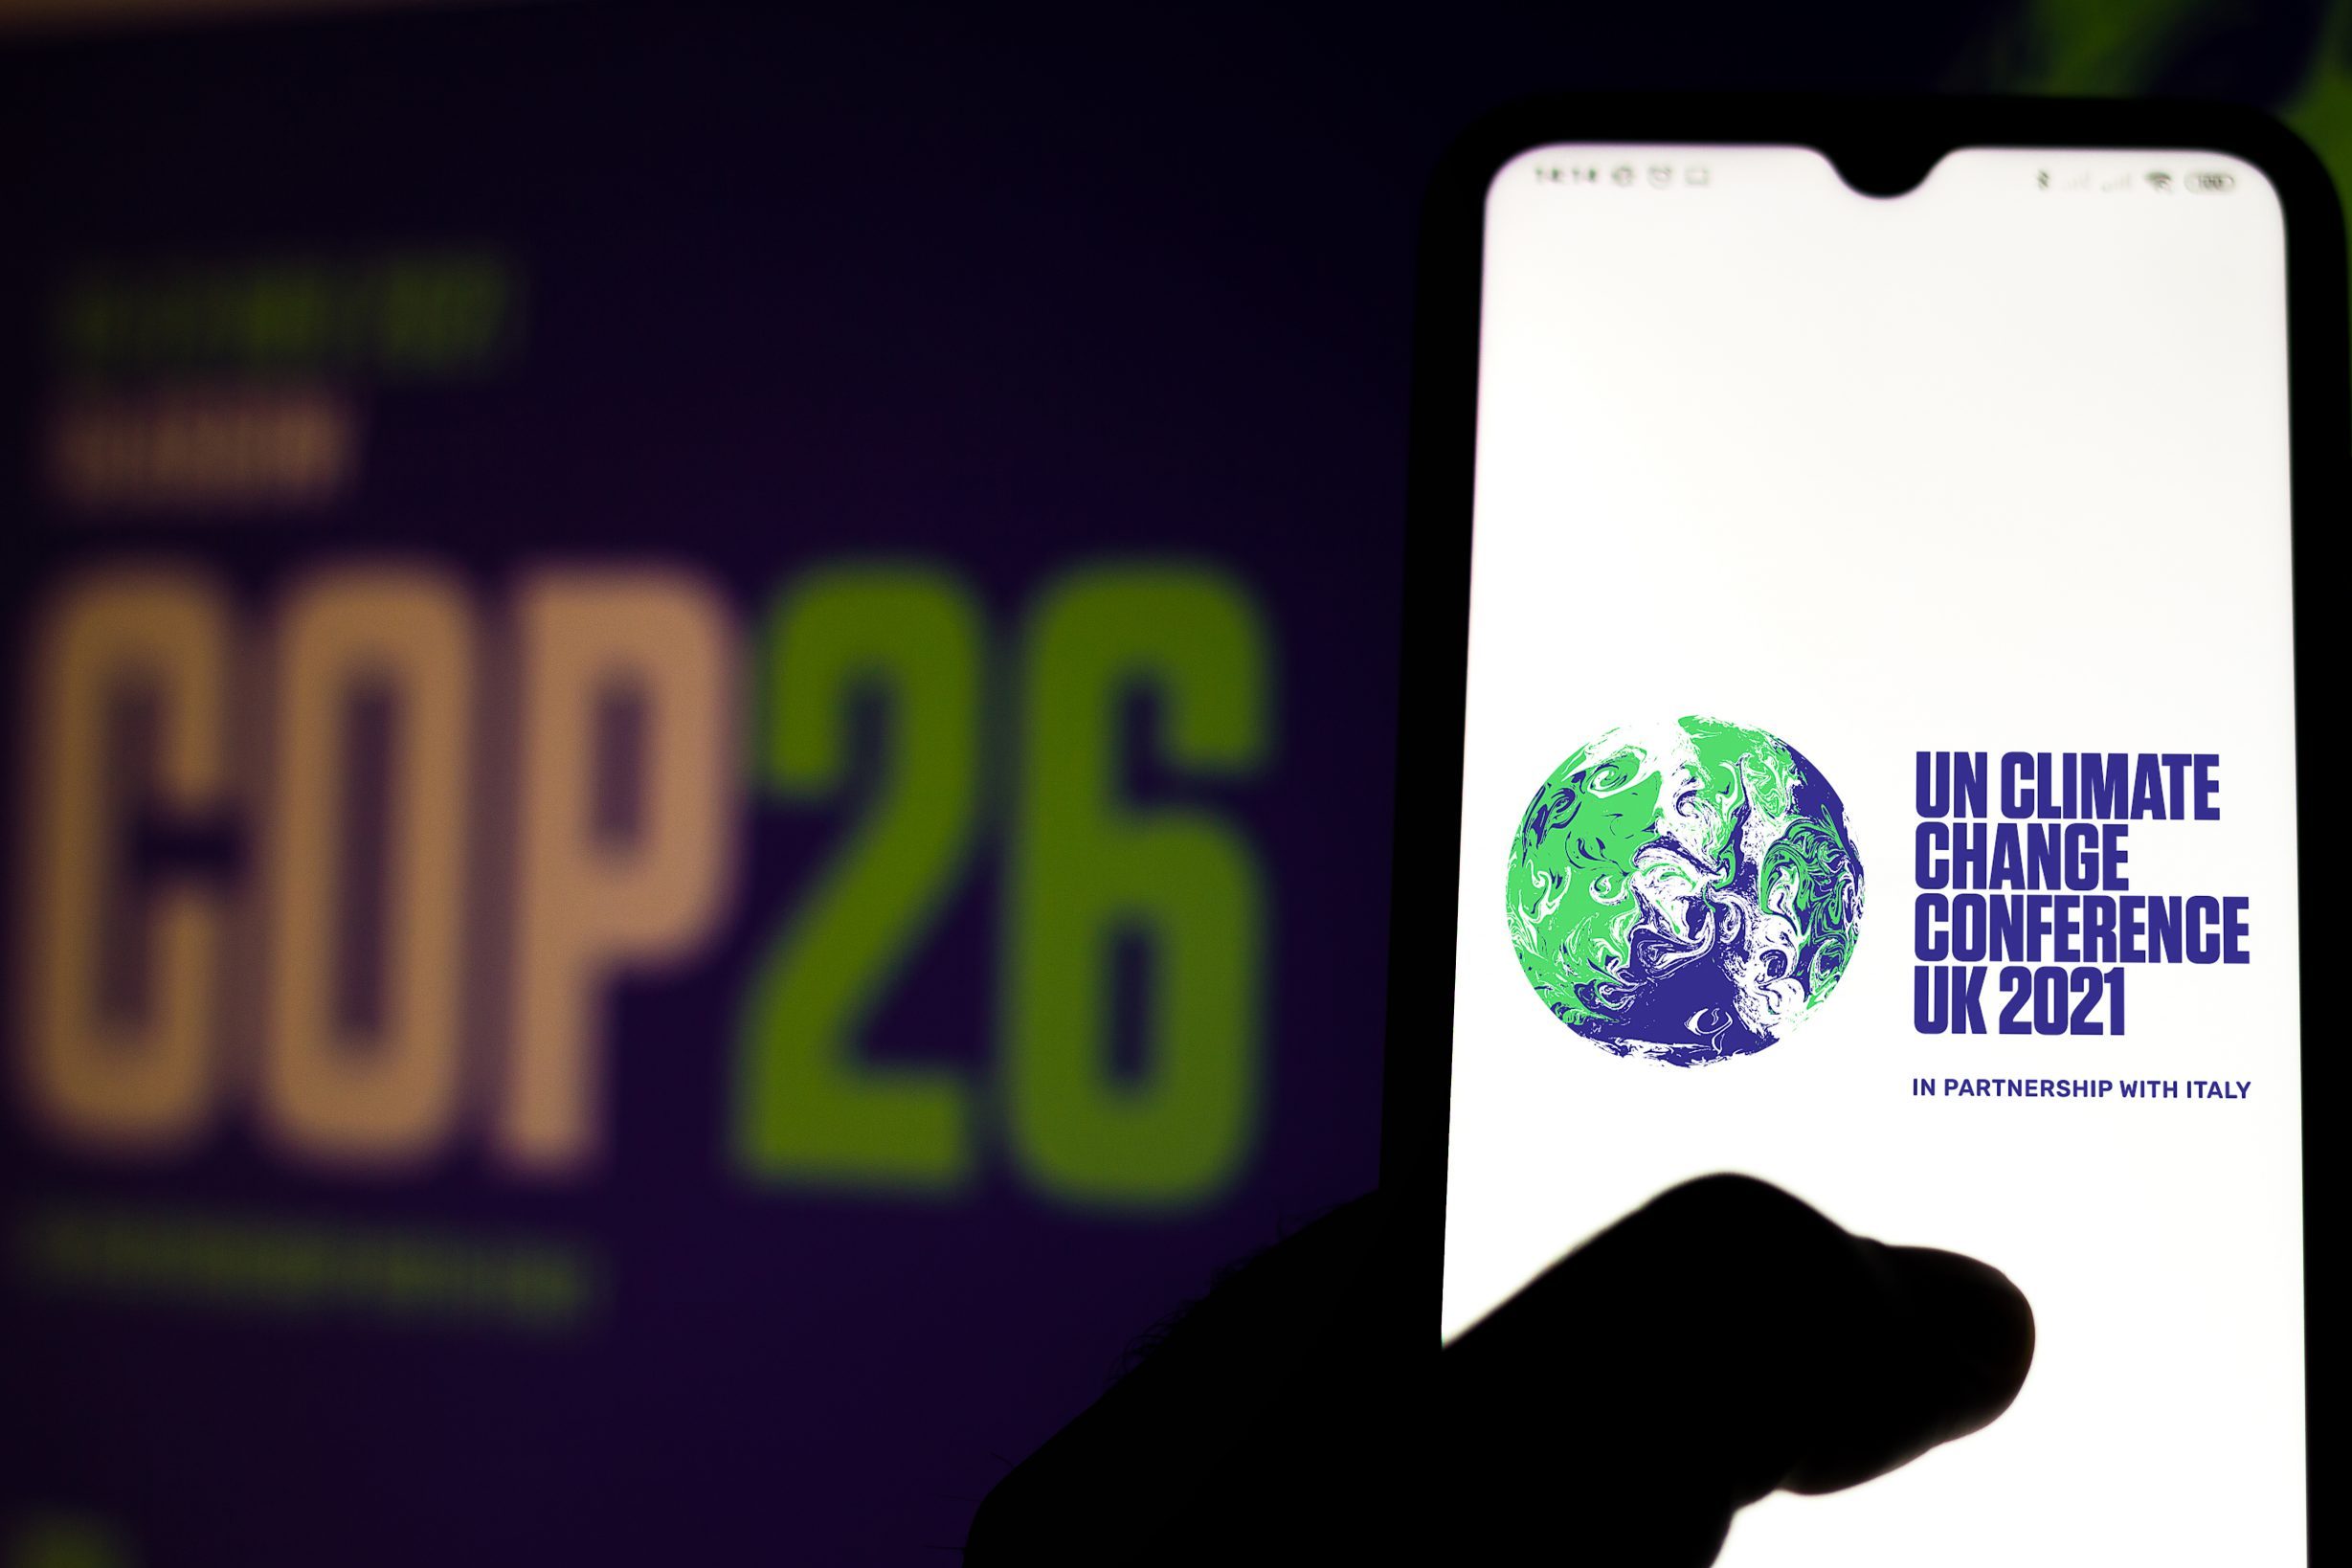 COP26 conference banner and smartphone app